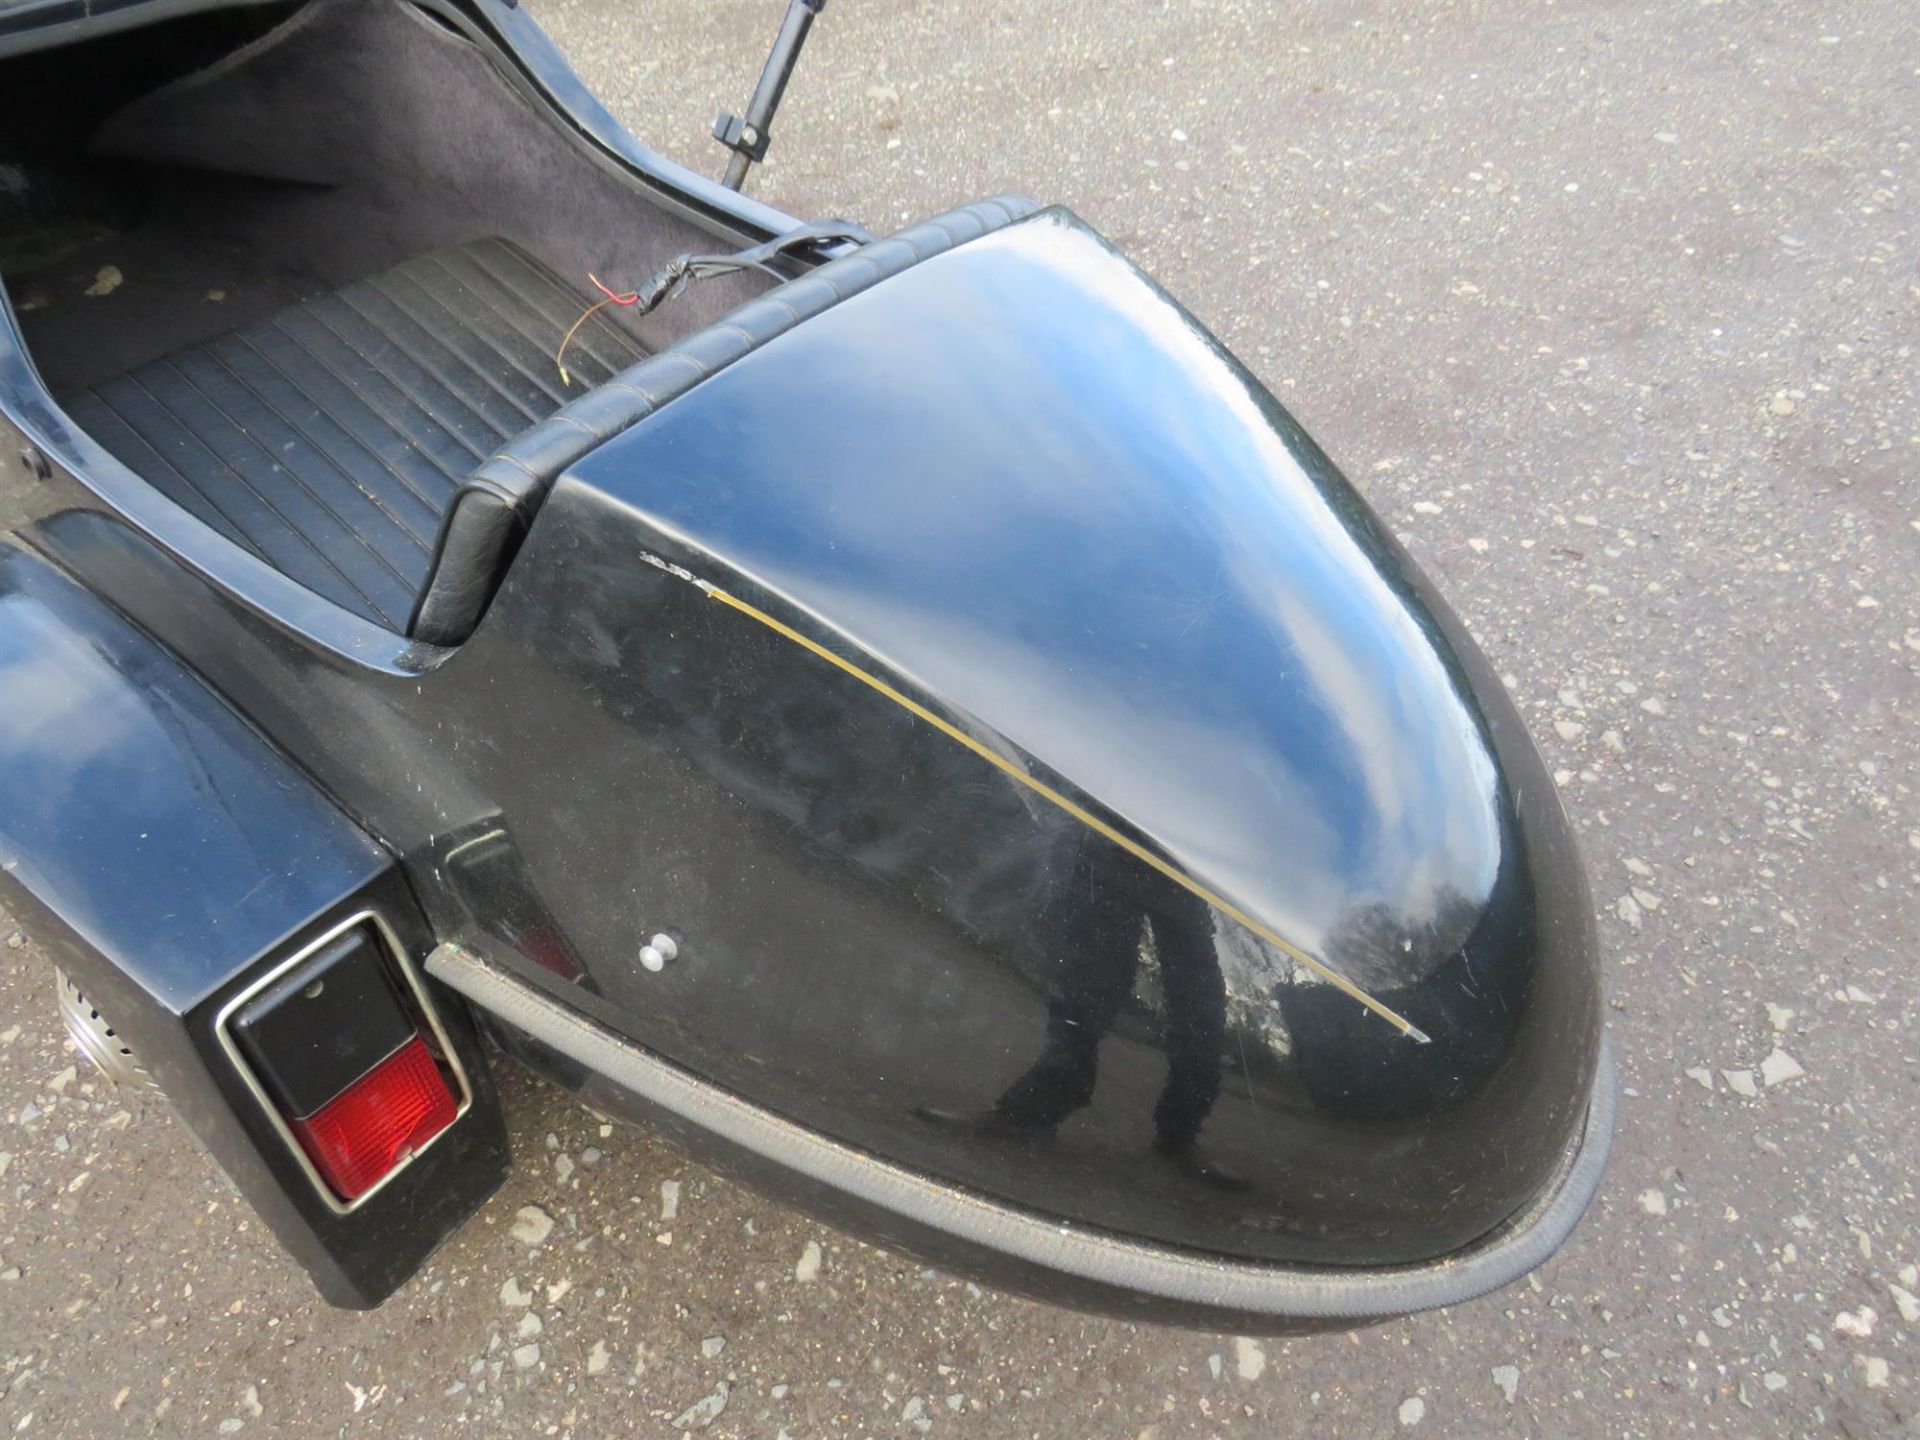 c.1980 Squire Sidecar - Image 7 of 10